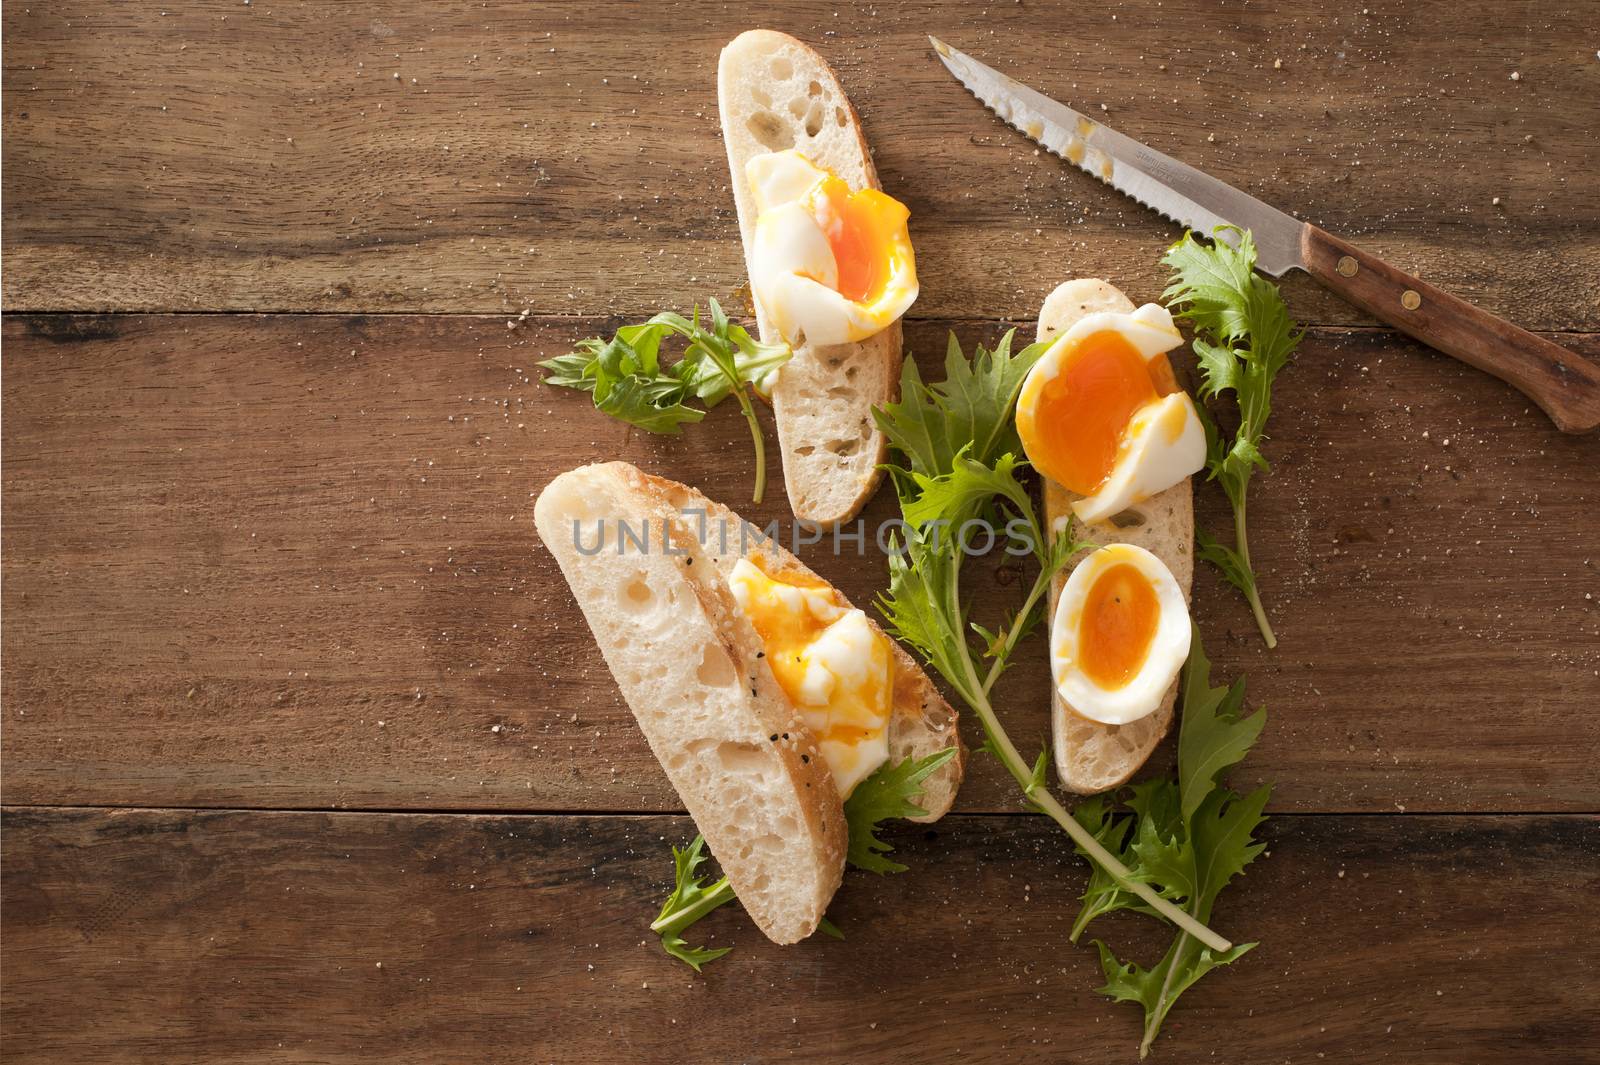 Sliced soft boiled eggs on freshly baked baguette with fresh green coriander and a knife on a wooden kitchen table